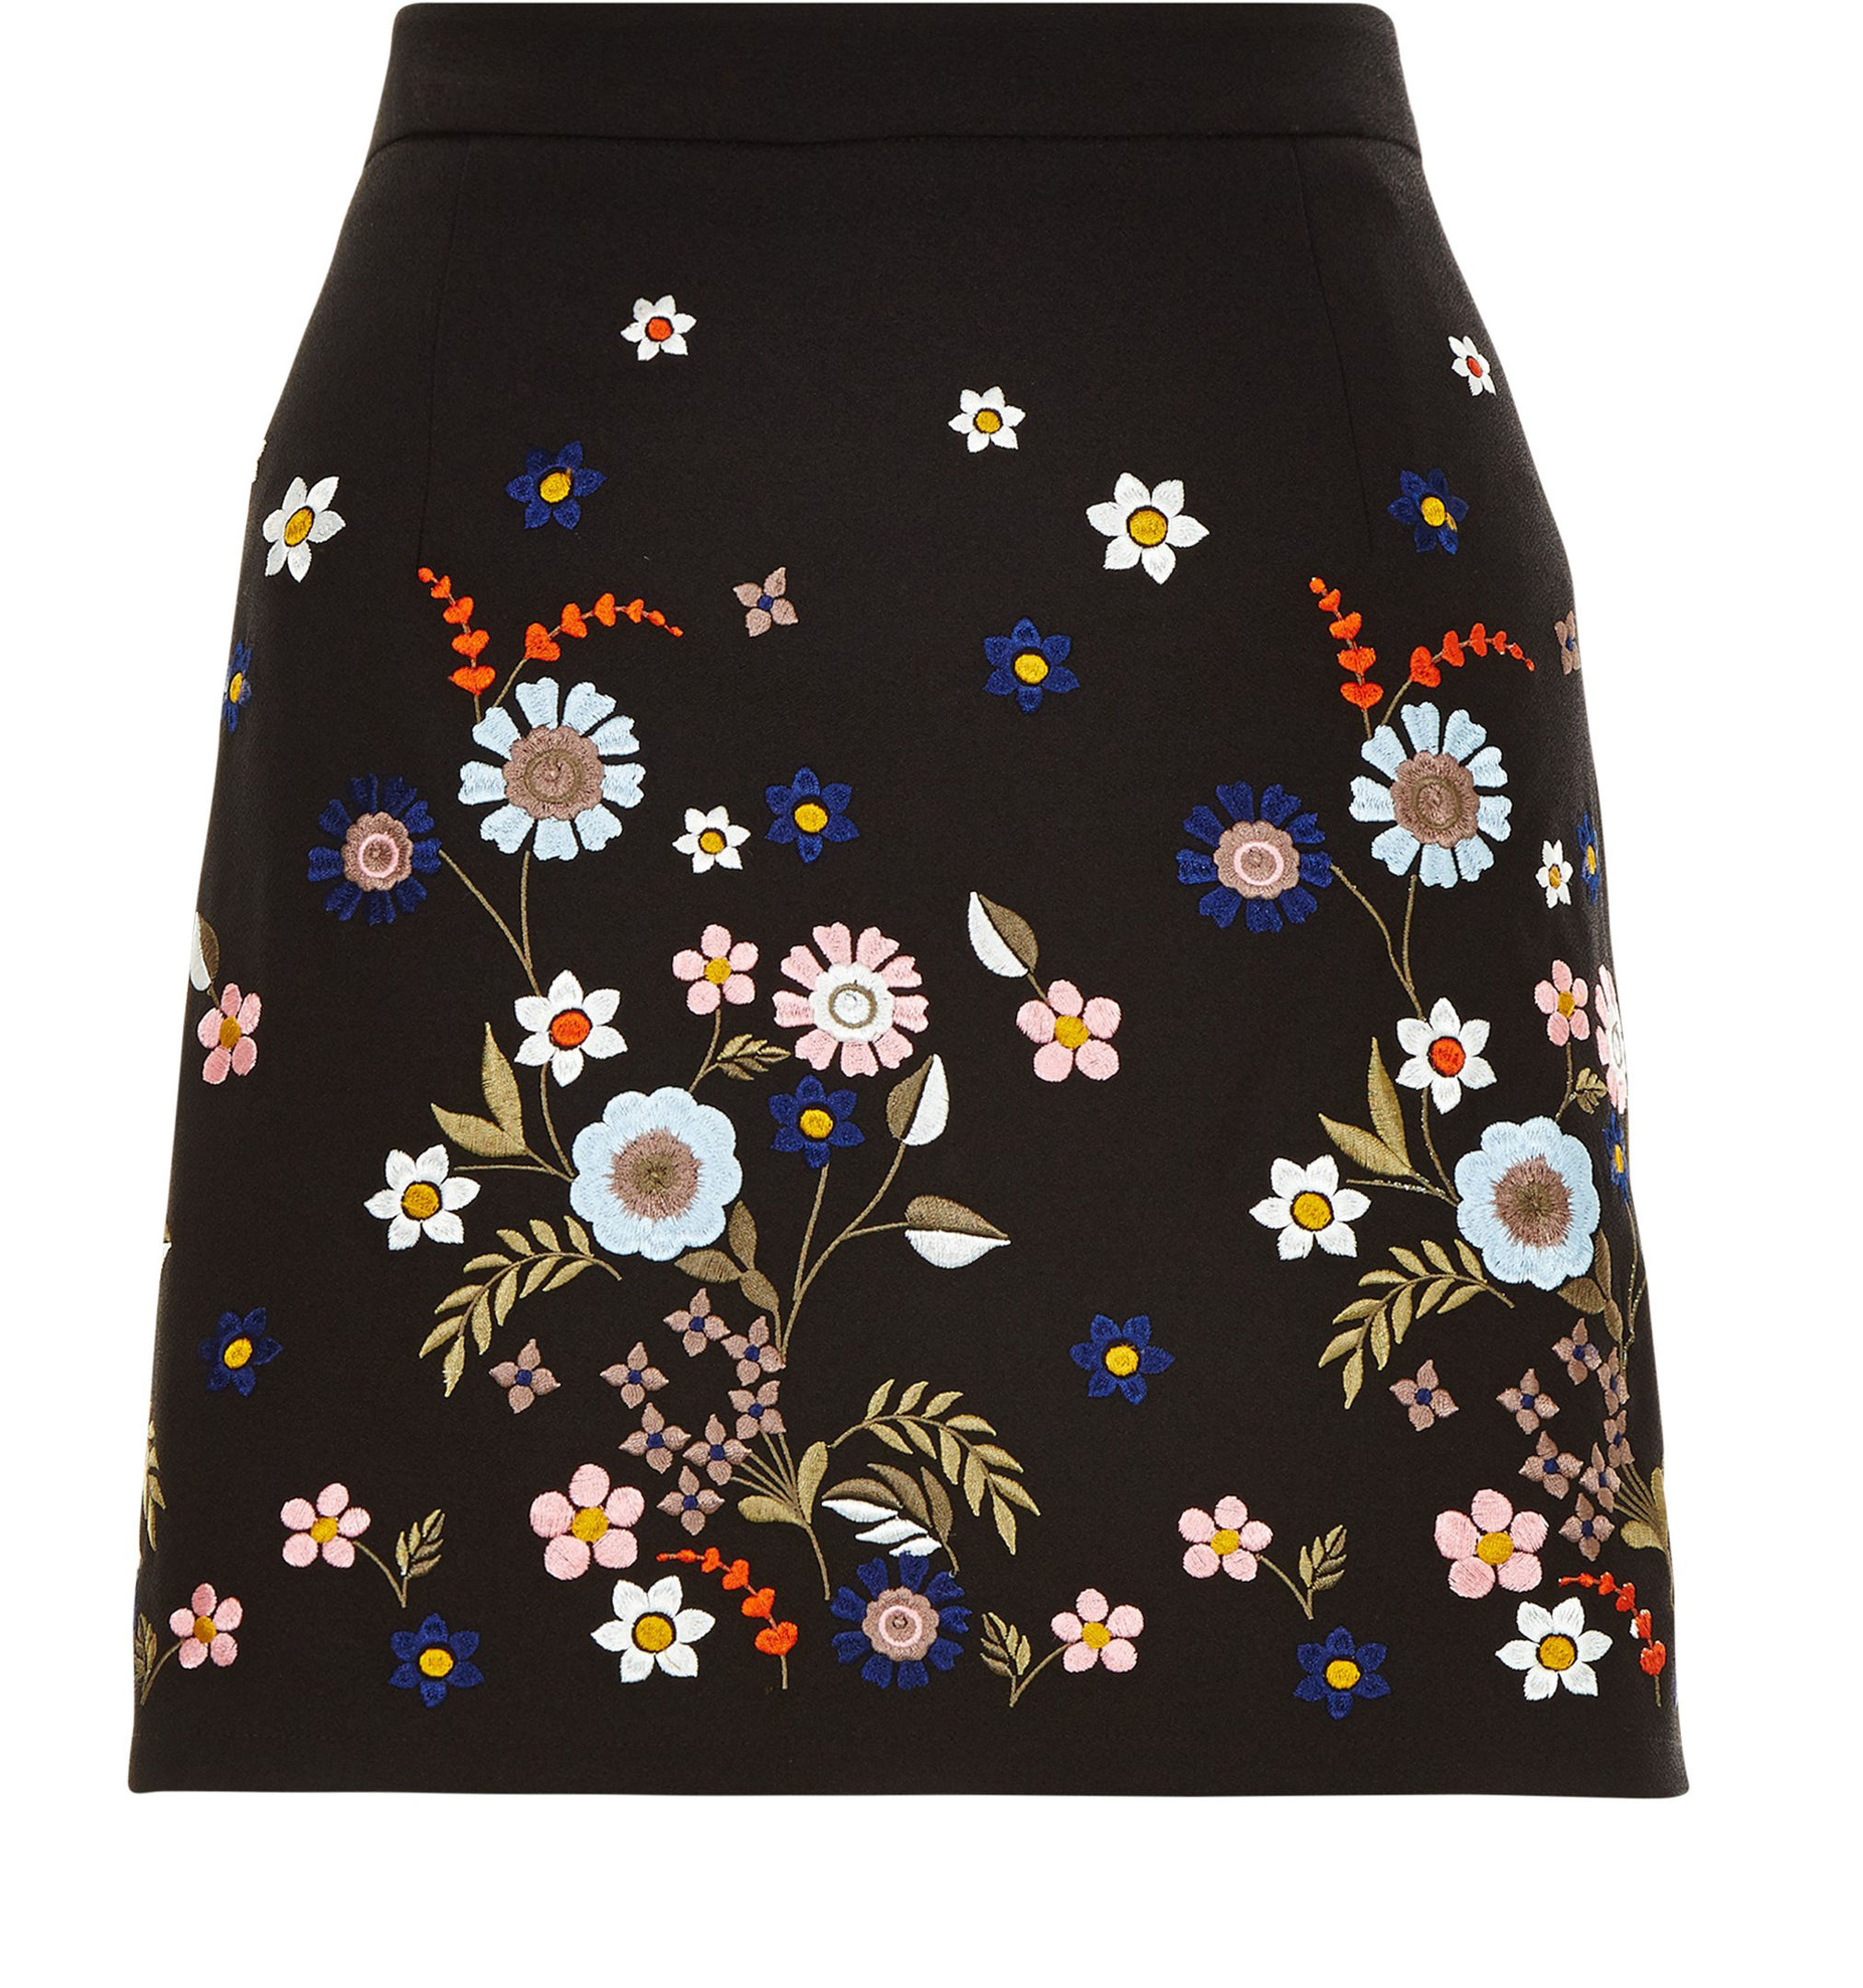 e New Look Black Floral Embroidered A-line Skirt, available from newlook.com. 